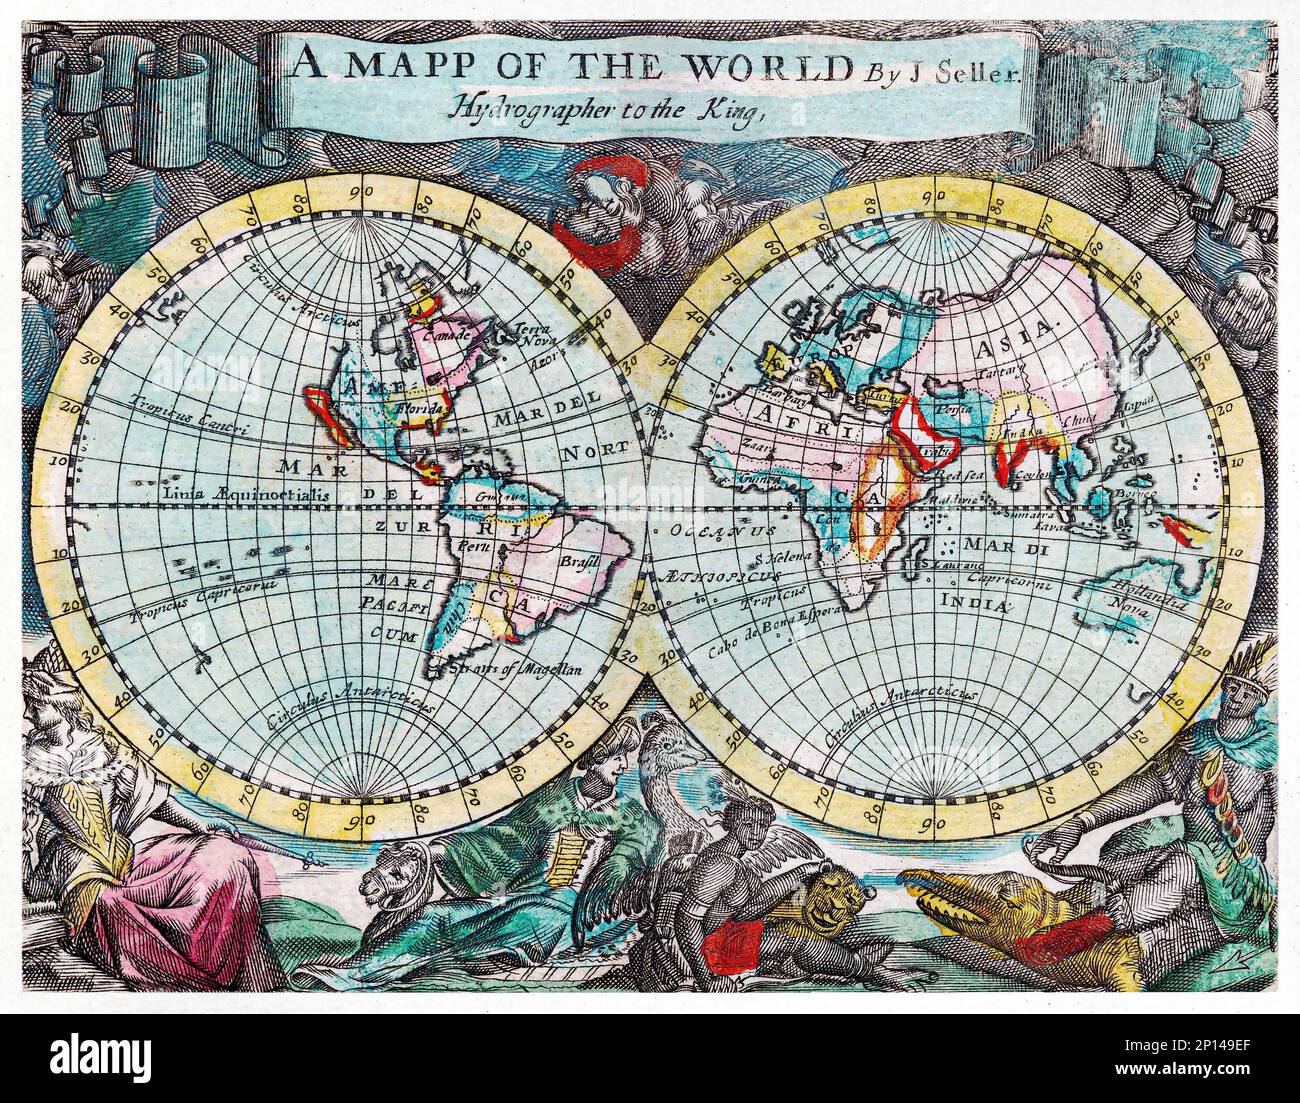 A mapp of the world (1682) by John Playford. Original From The New York Public Library. Stock Photo